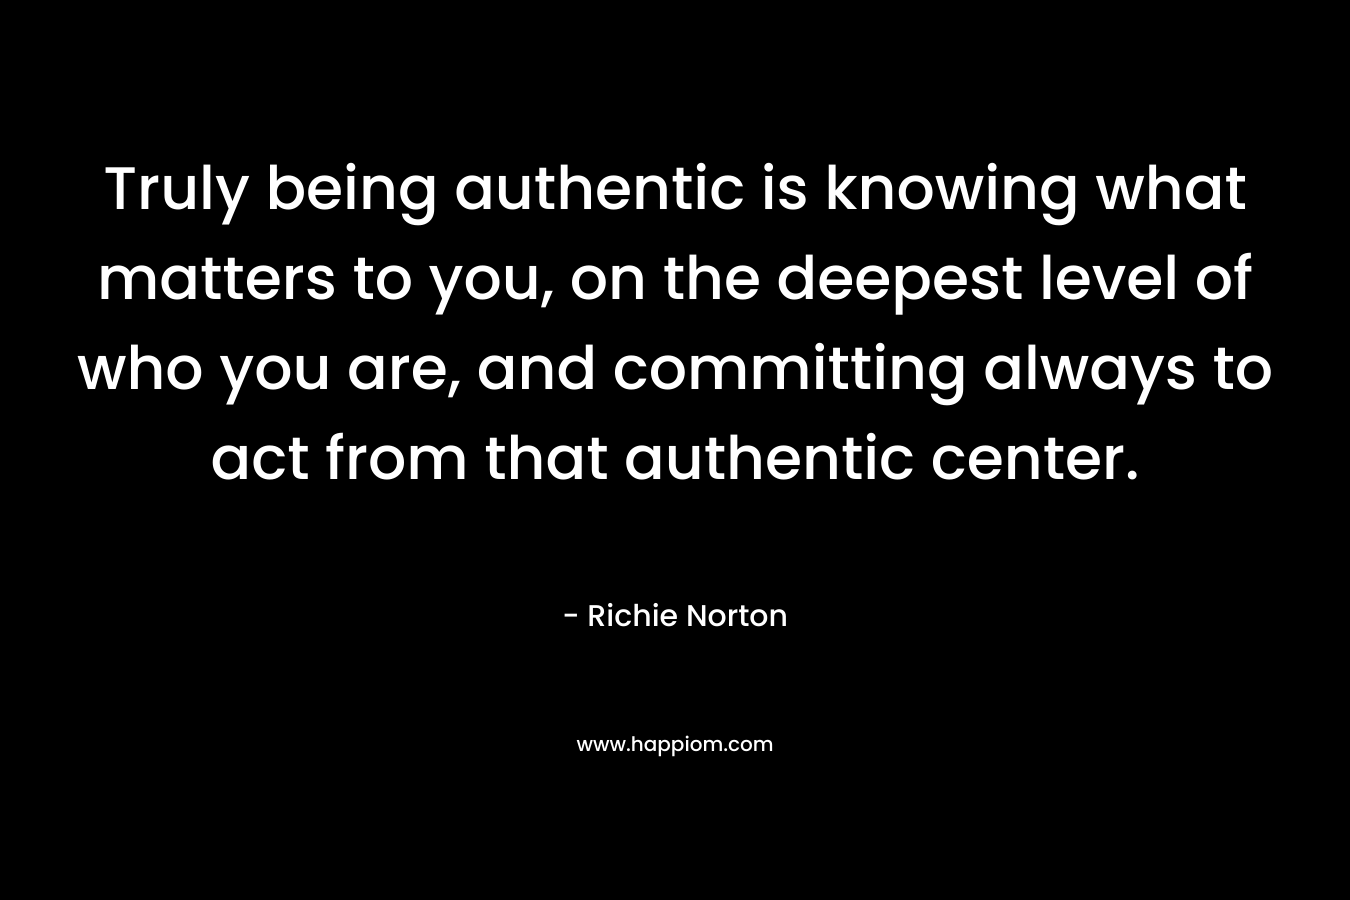 Truly being authentic is knowing what matters to you, on the deepest level of who you are, and committing always to act from that authentic center. – Richie Norton